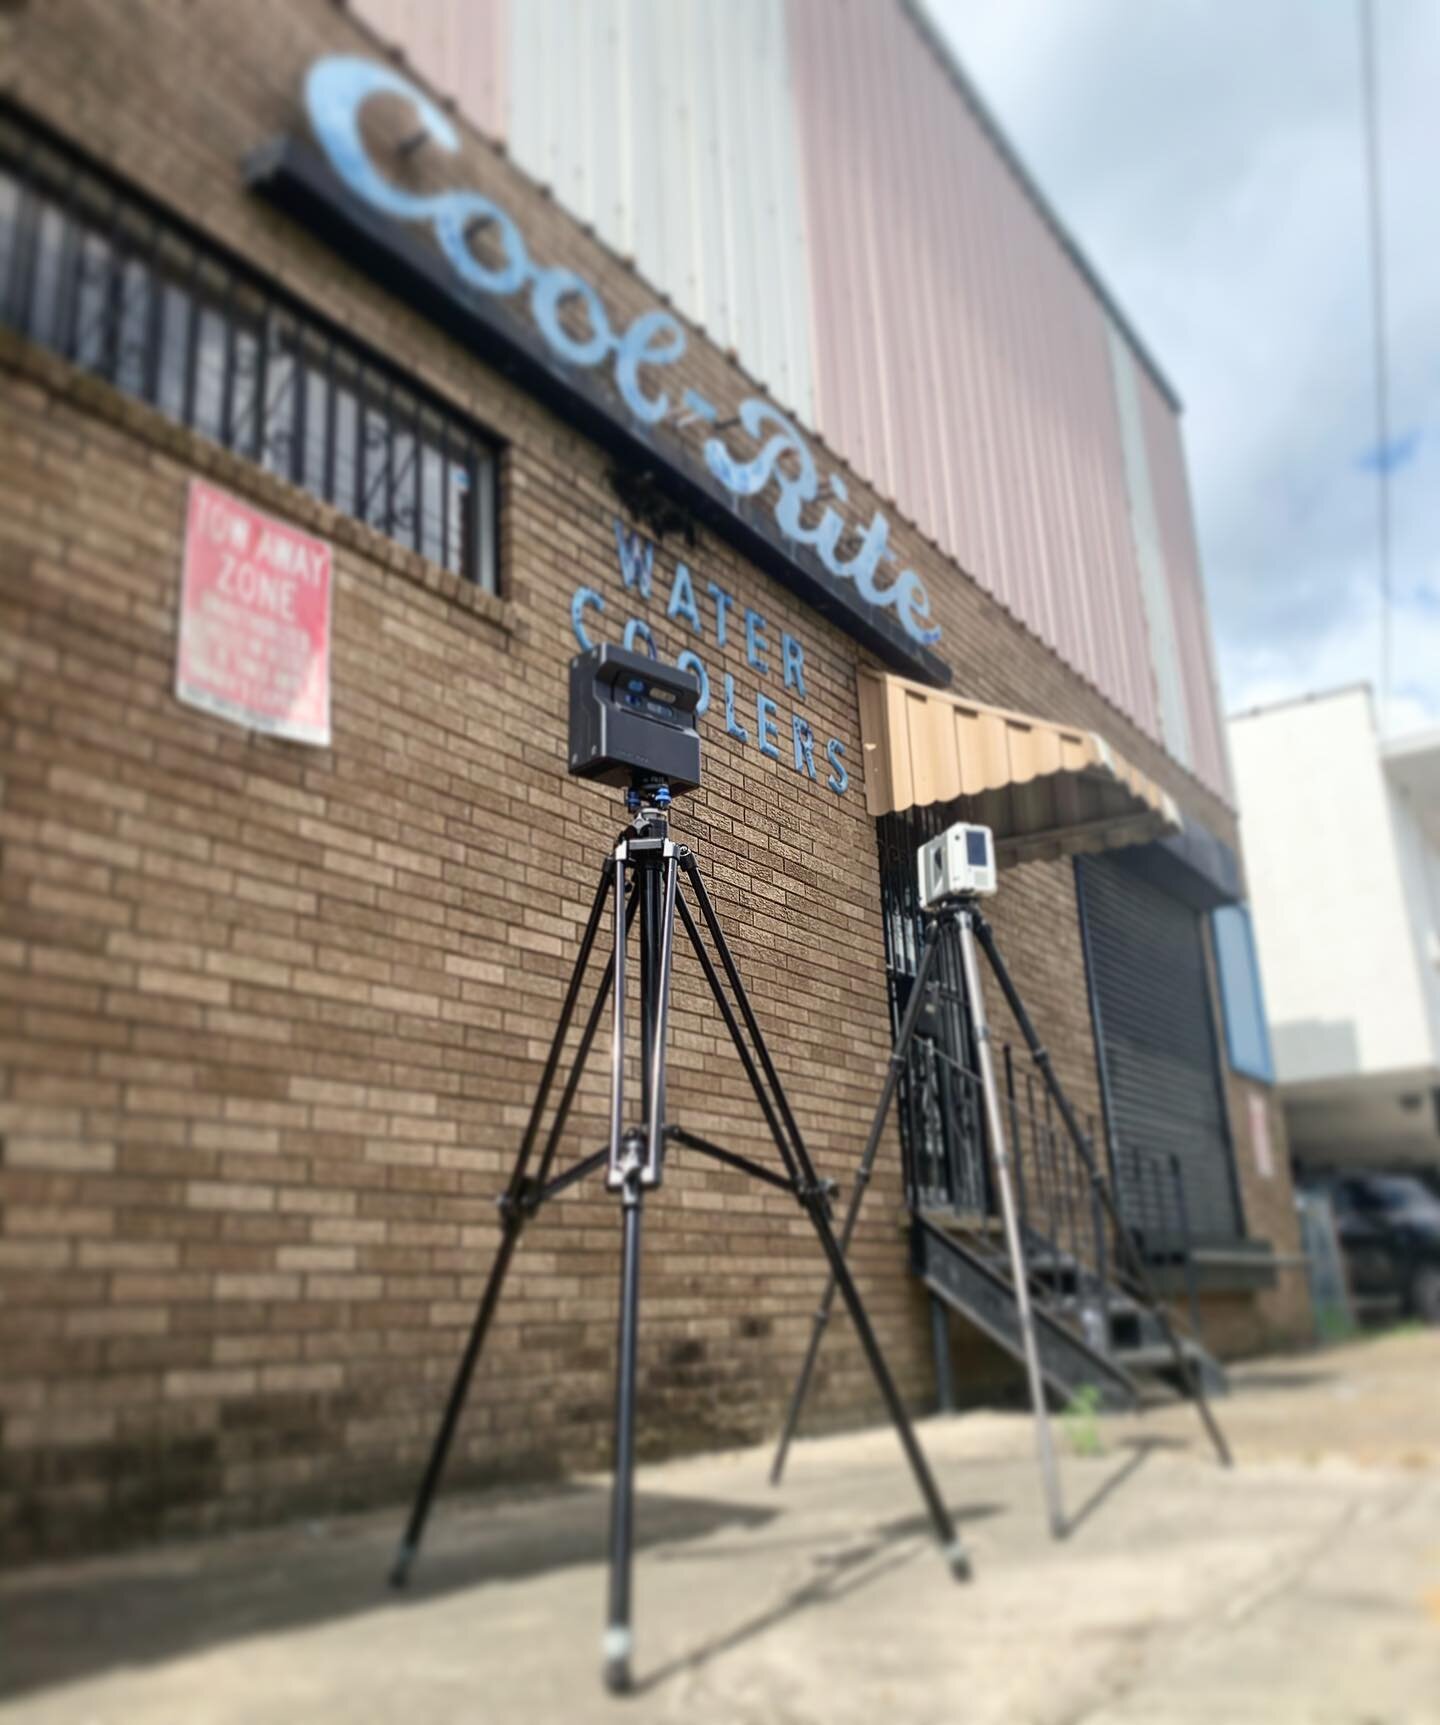 #techtuesday we&rsquo;ve got our #realitycapture team on another site for @pacegroupllc today! #sitevisit #jobsite #ConstructionDocumentation #historicpreservation #workinnola #Engineers #ConstructionTechnologist  #neworleansla #laserscanning @leicag